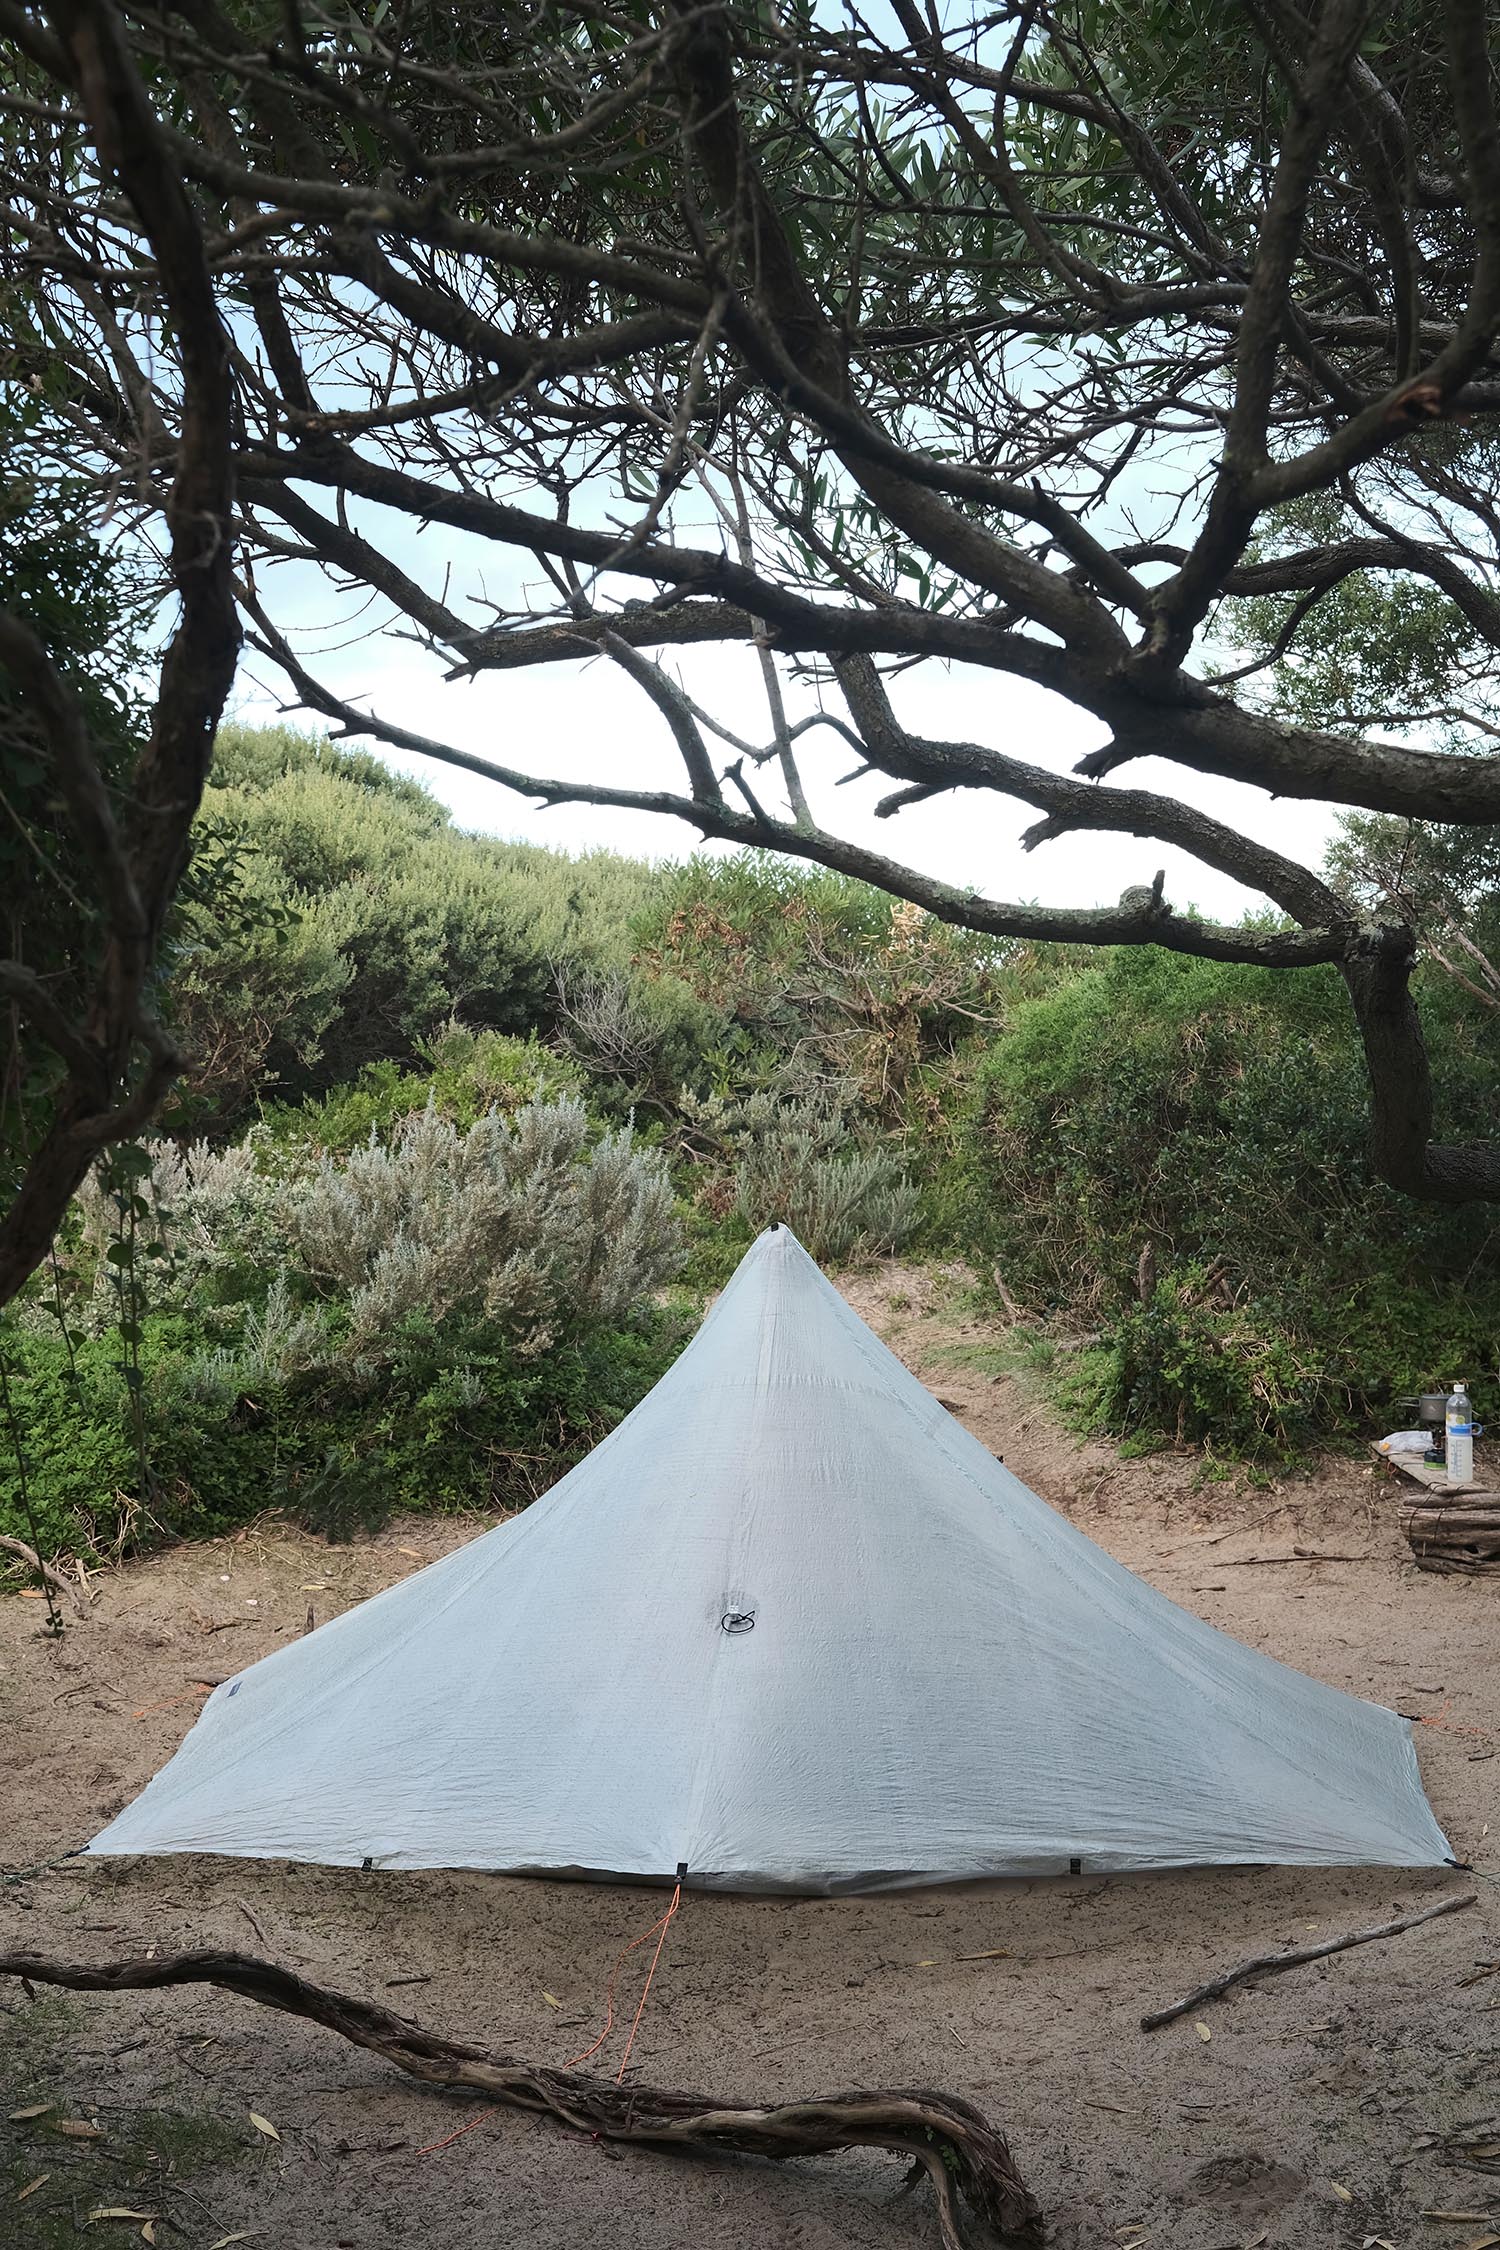 Ultralight tent at Oberon Bay, Wilsons Promontory National Park